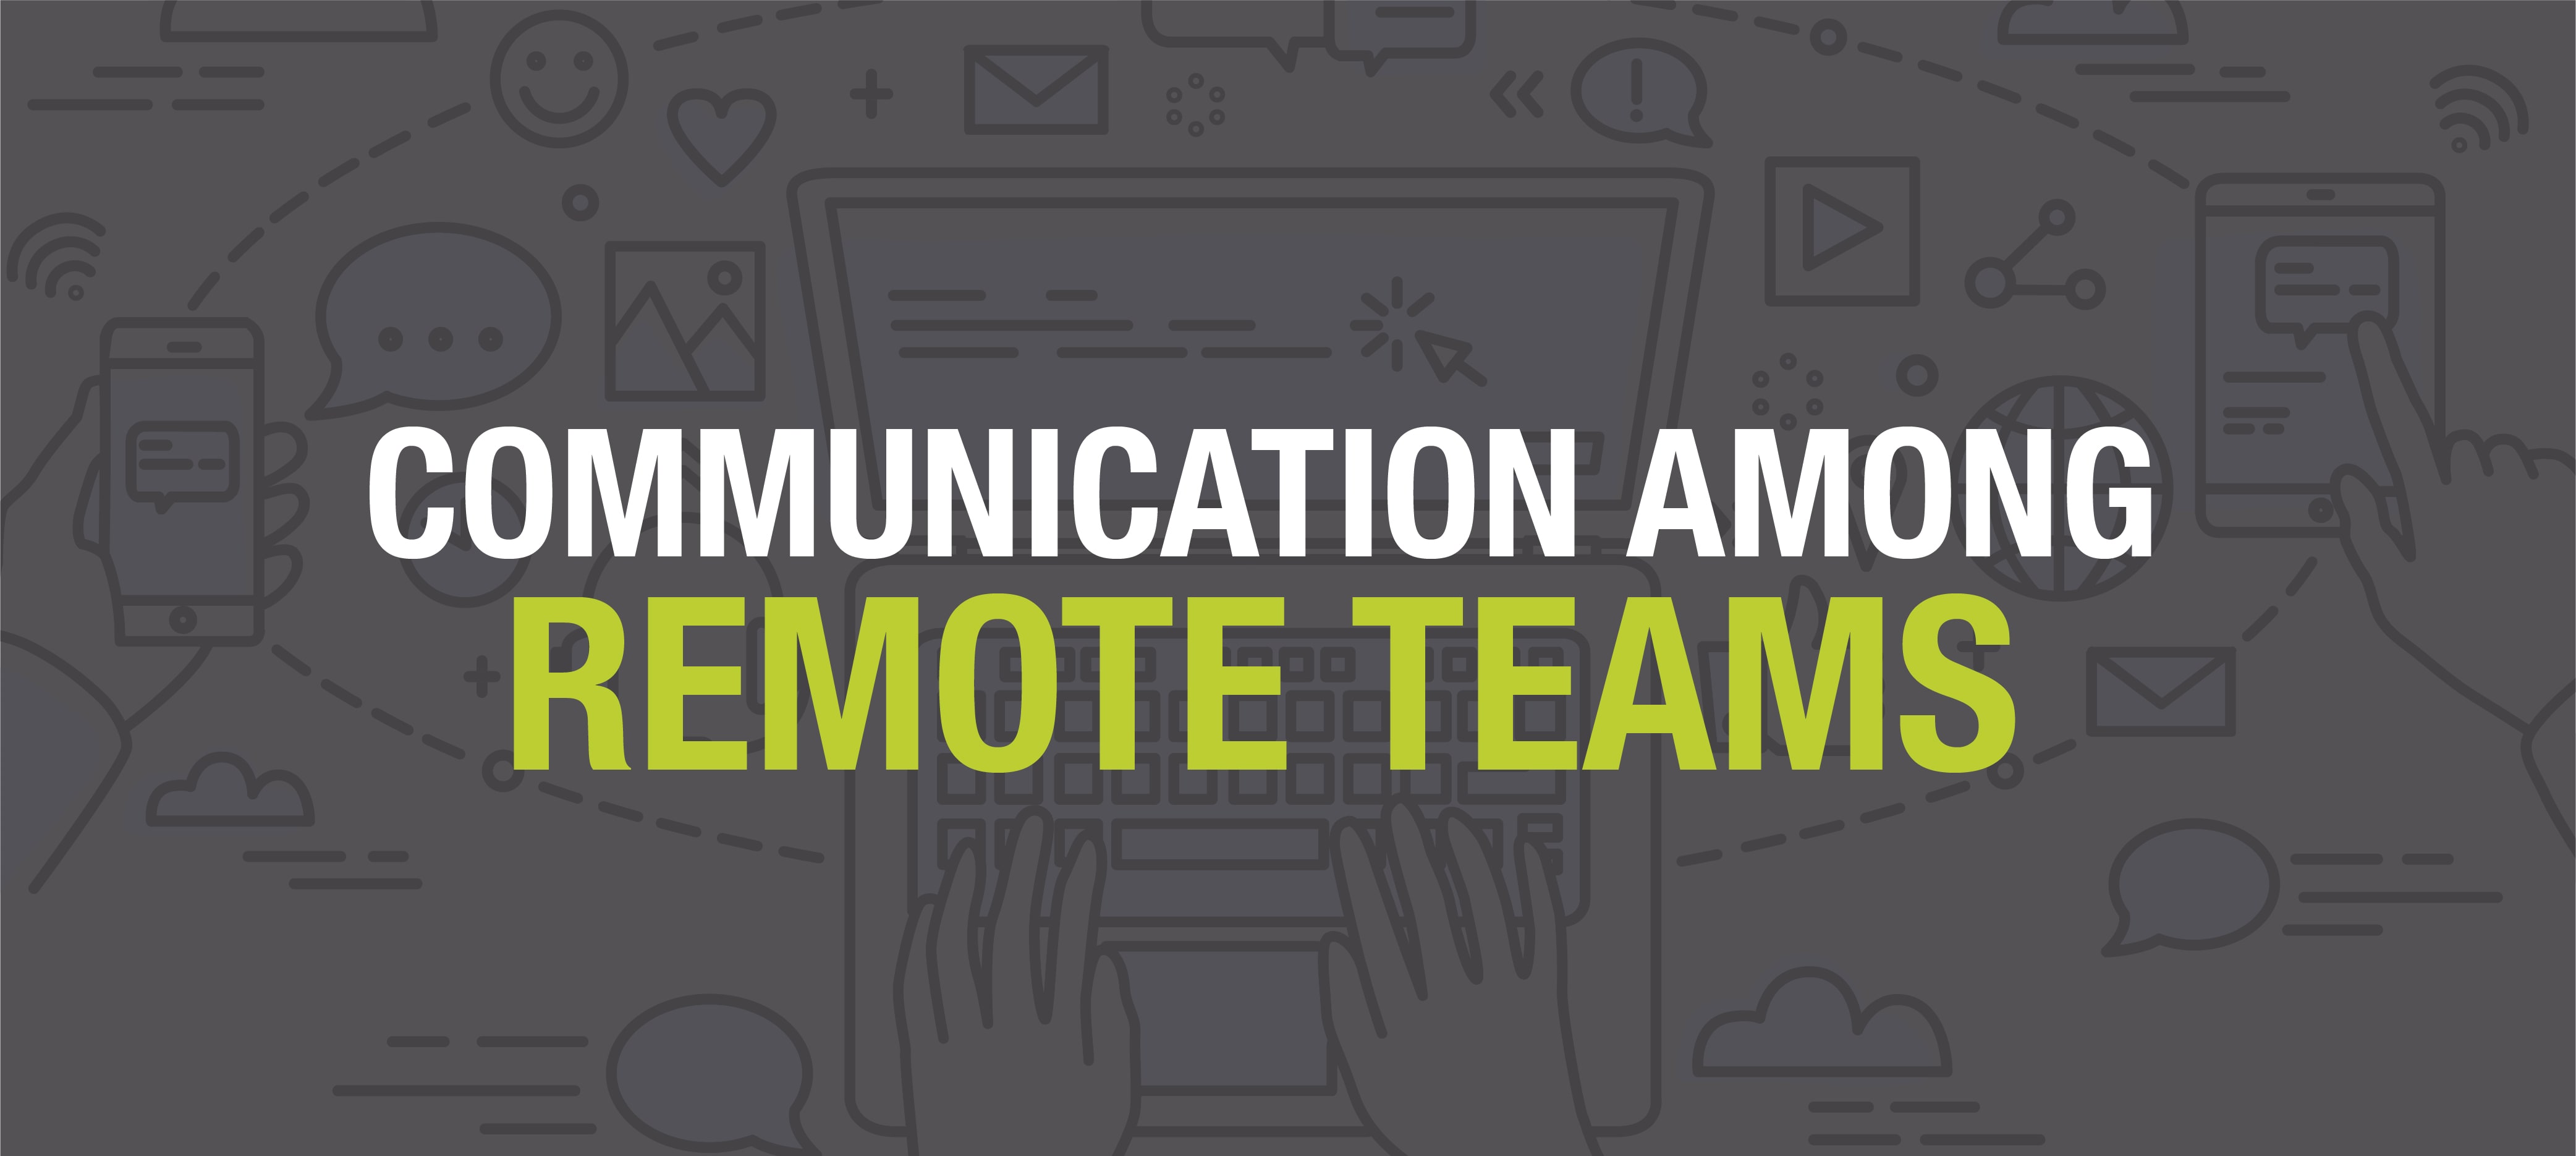 Communication for Remote Teams - Instant Offices